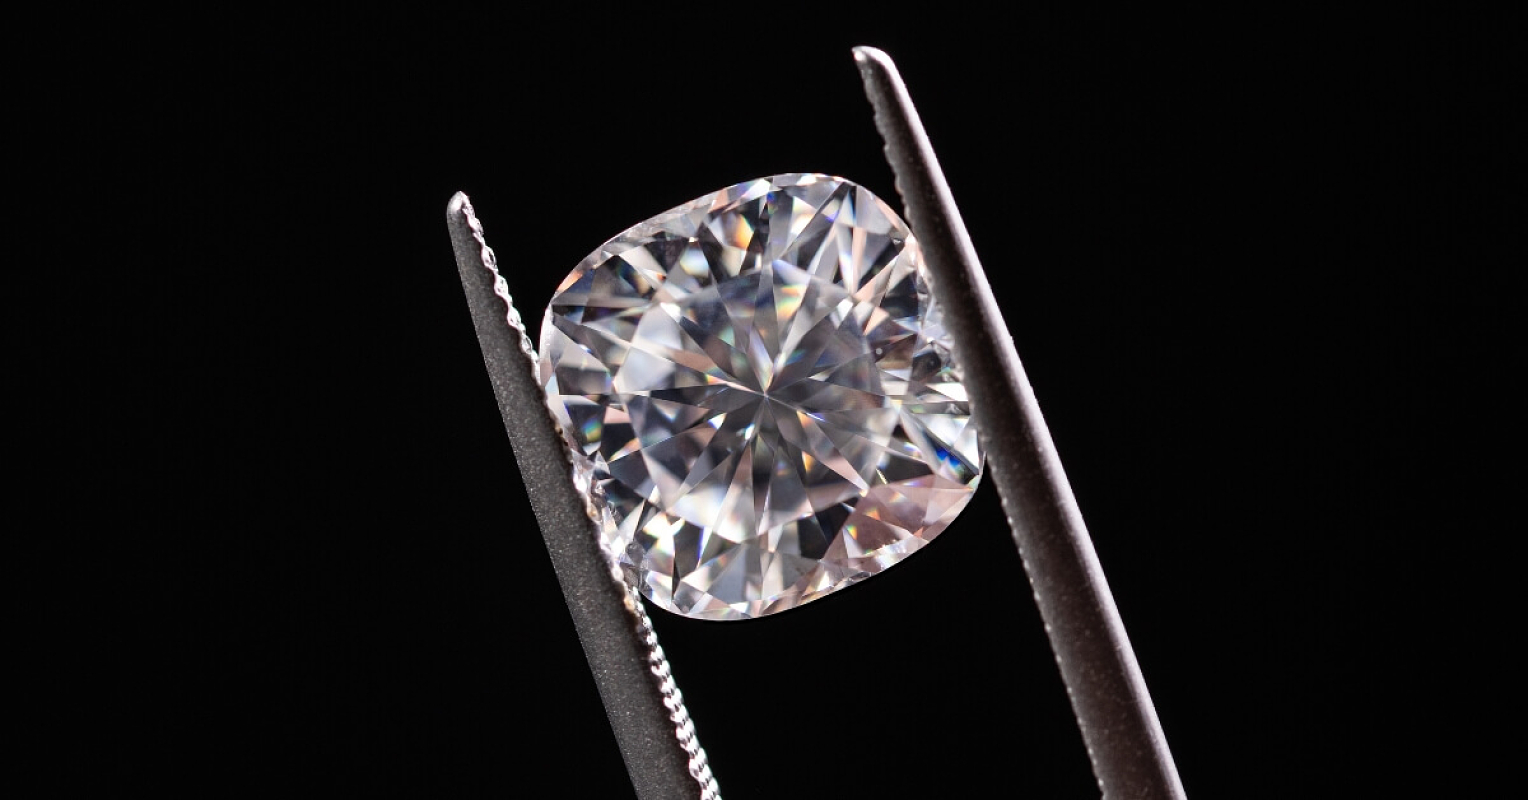 a moissanite in between a metal, silver tweezer in isolated dark background
